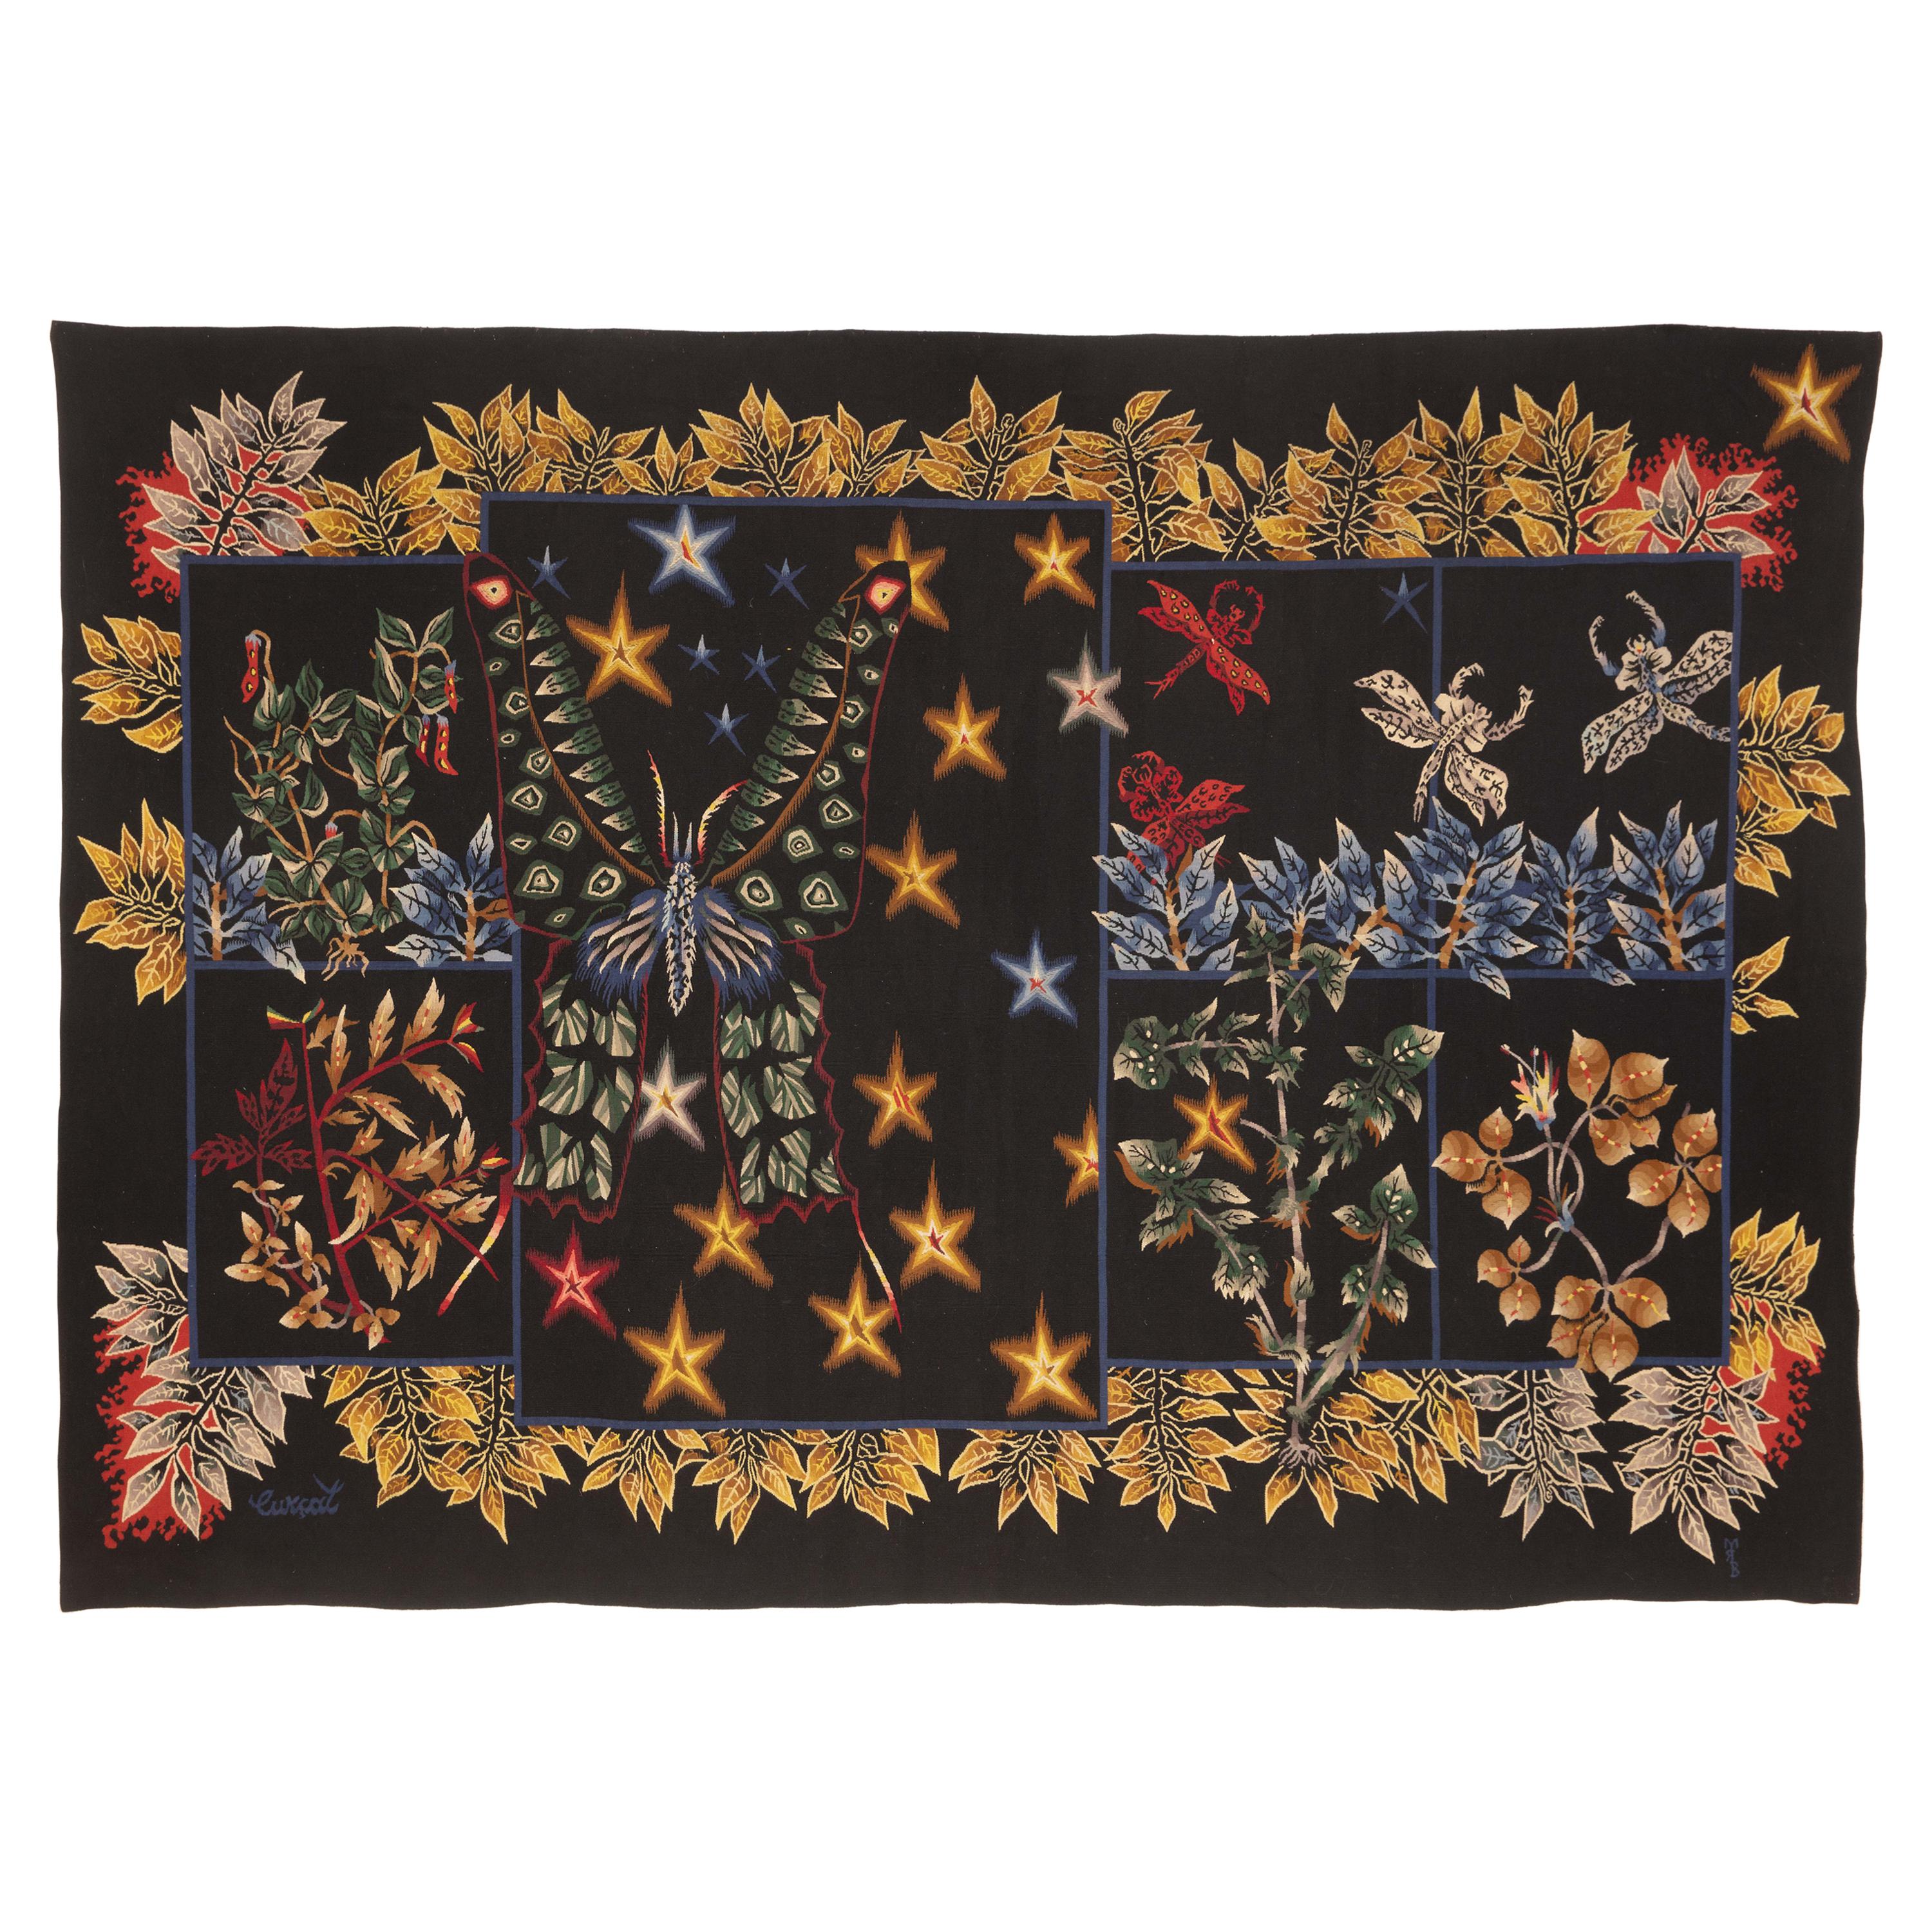 Exceptional Tapestry by Jean Lurçat "Butterflies and Foliage"